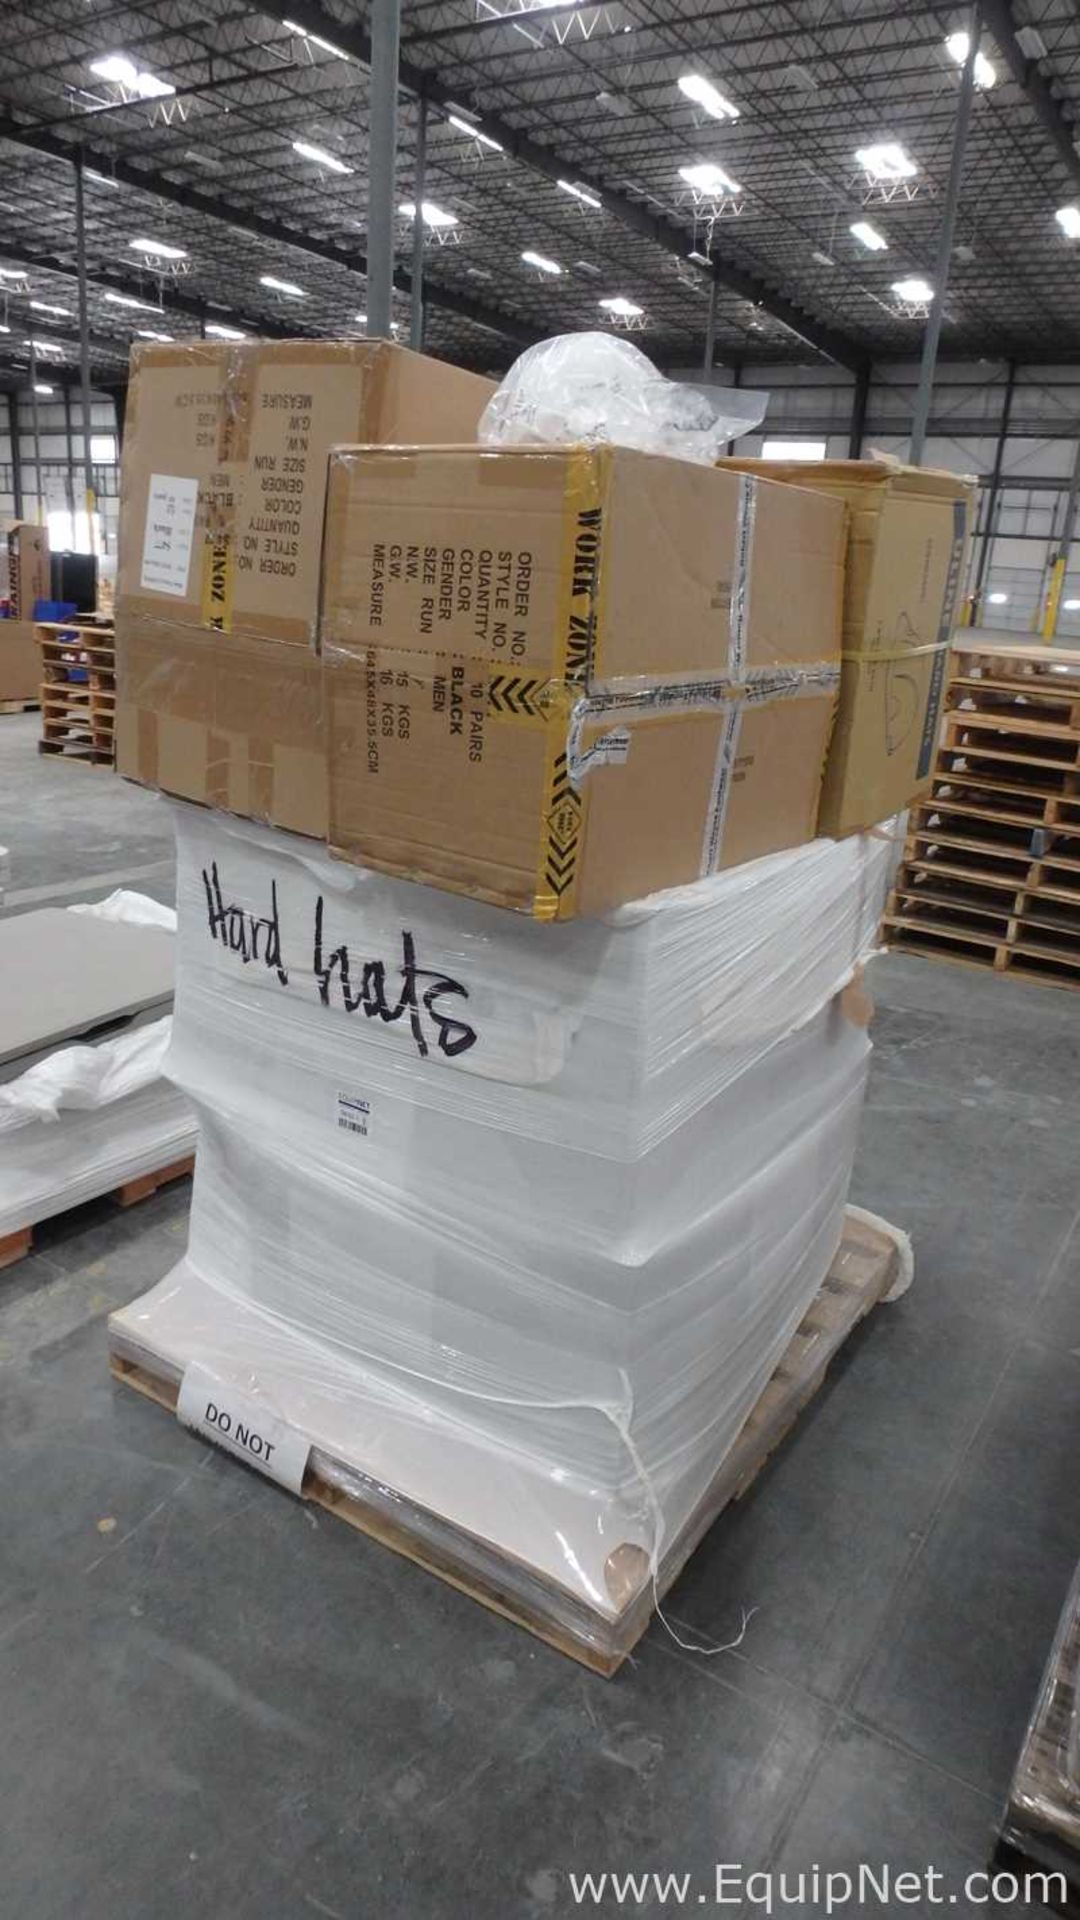 Lot of 1 Pallet With Hard Hats - Image 3 of 6